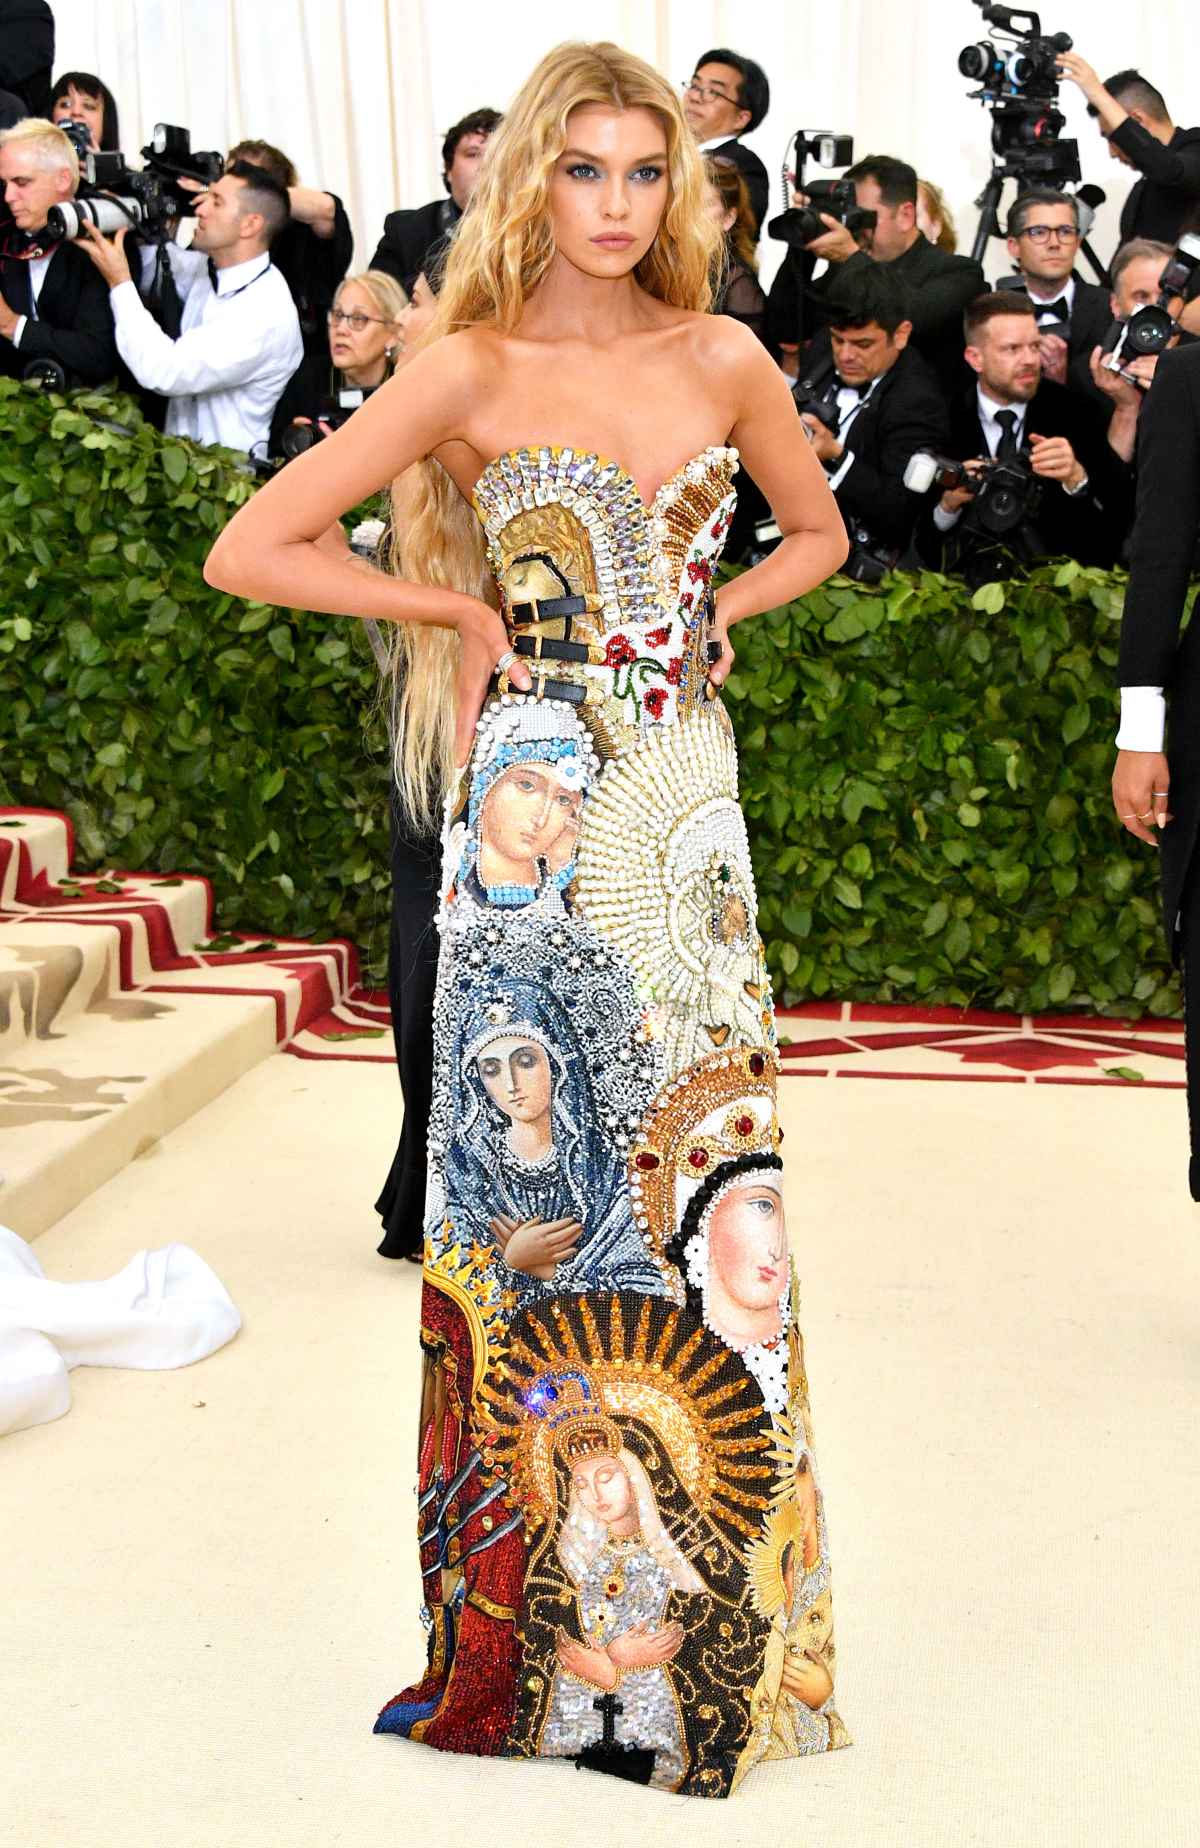 Alicia Vikander in a silver & navy column dress at the 2015 Met Gala. 01.